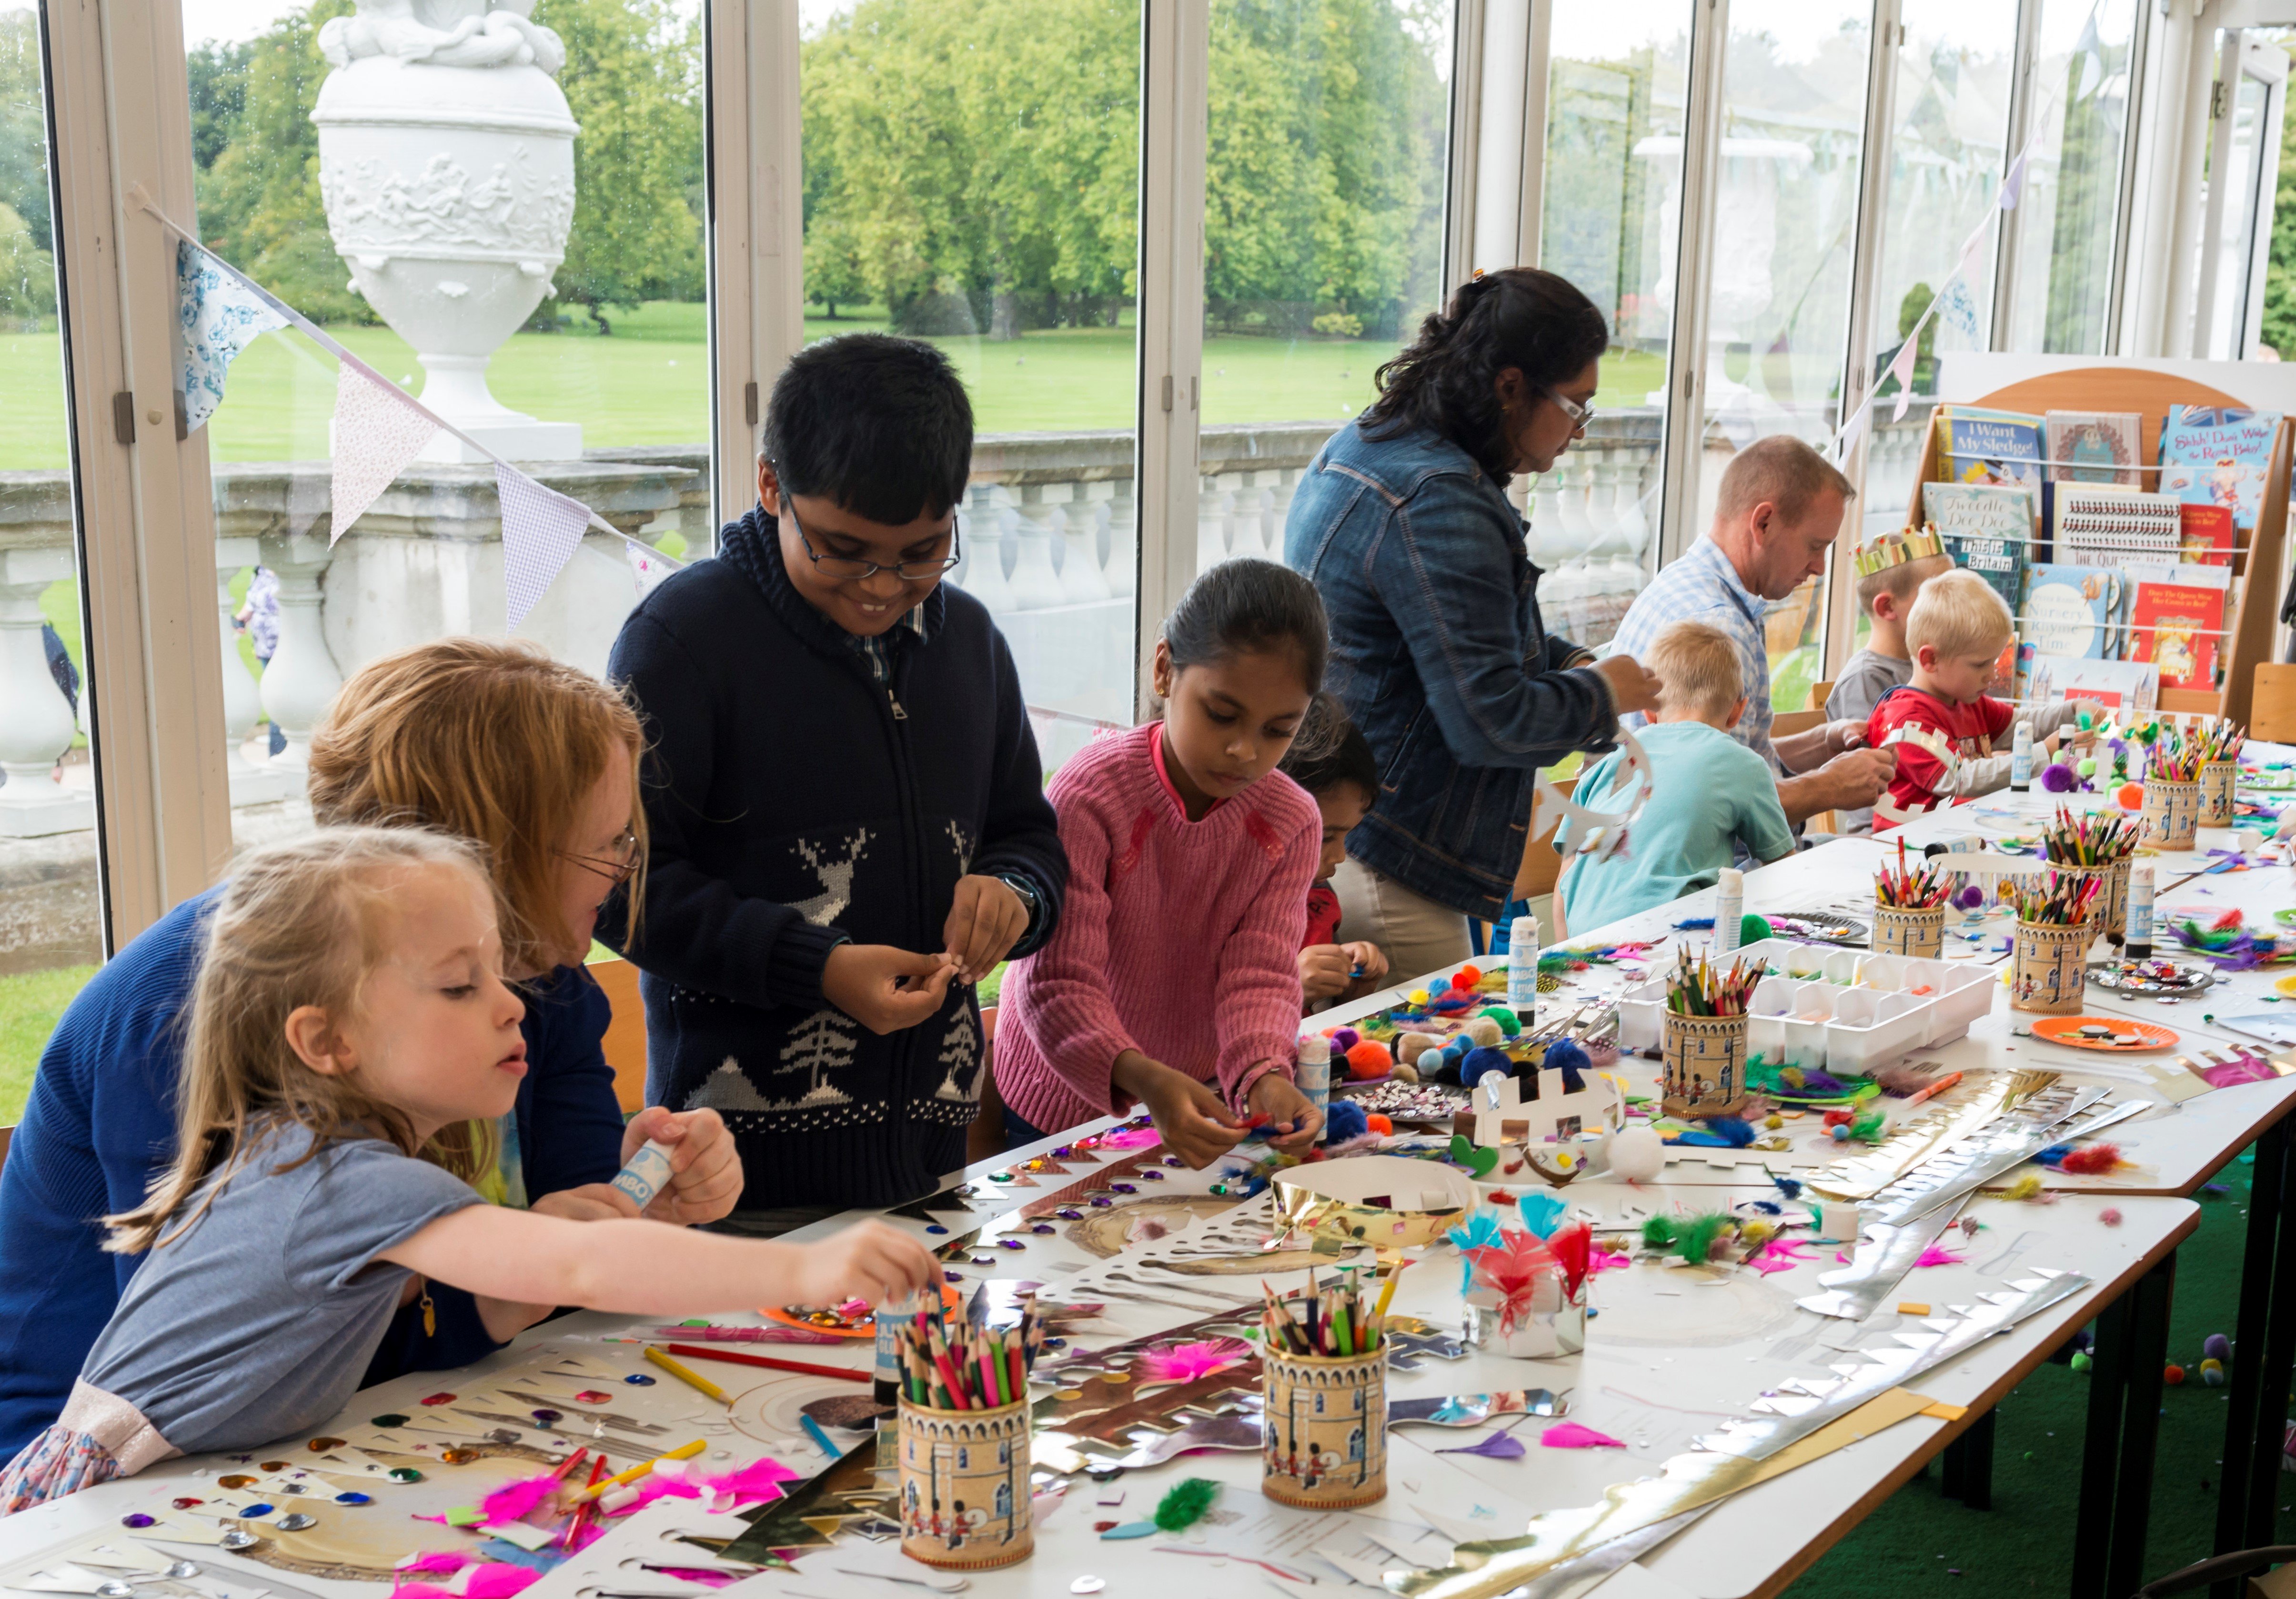 Family craft activity in the Family Pavilion, Buckingham Palace